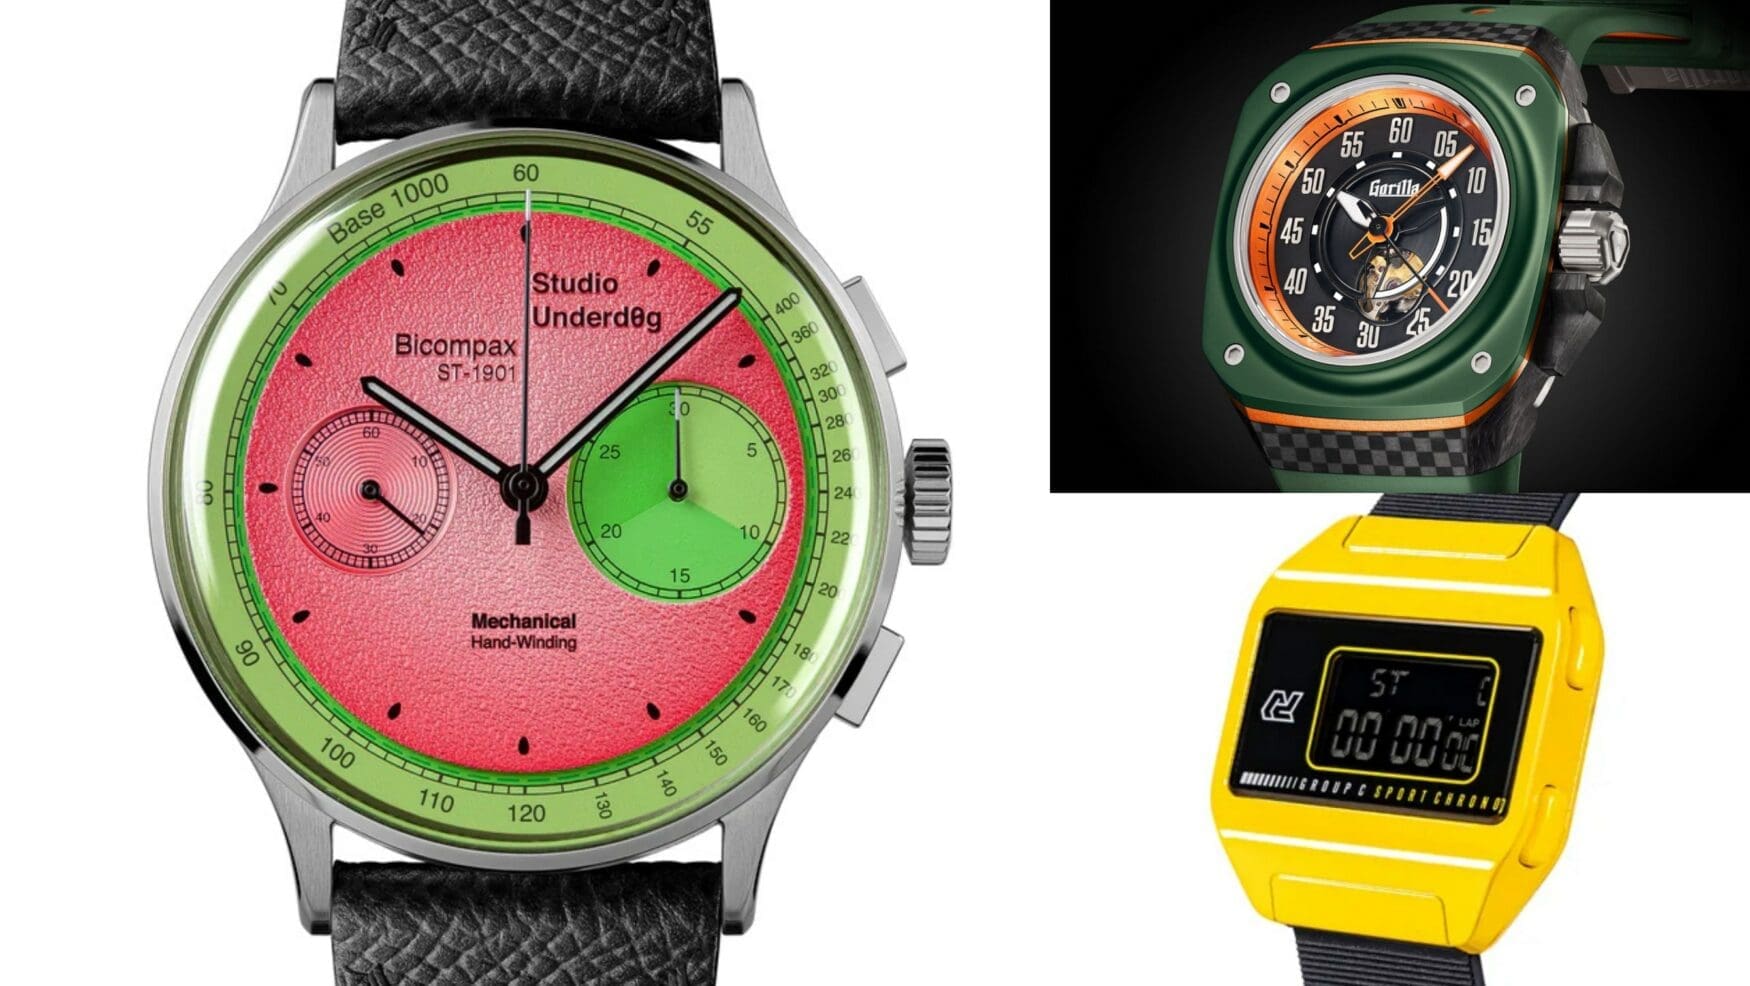 5 watch brands that know how to have a bit of fun